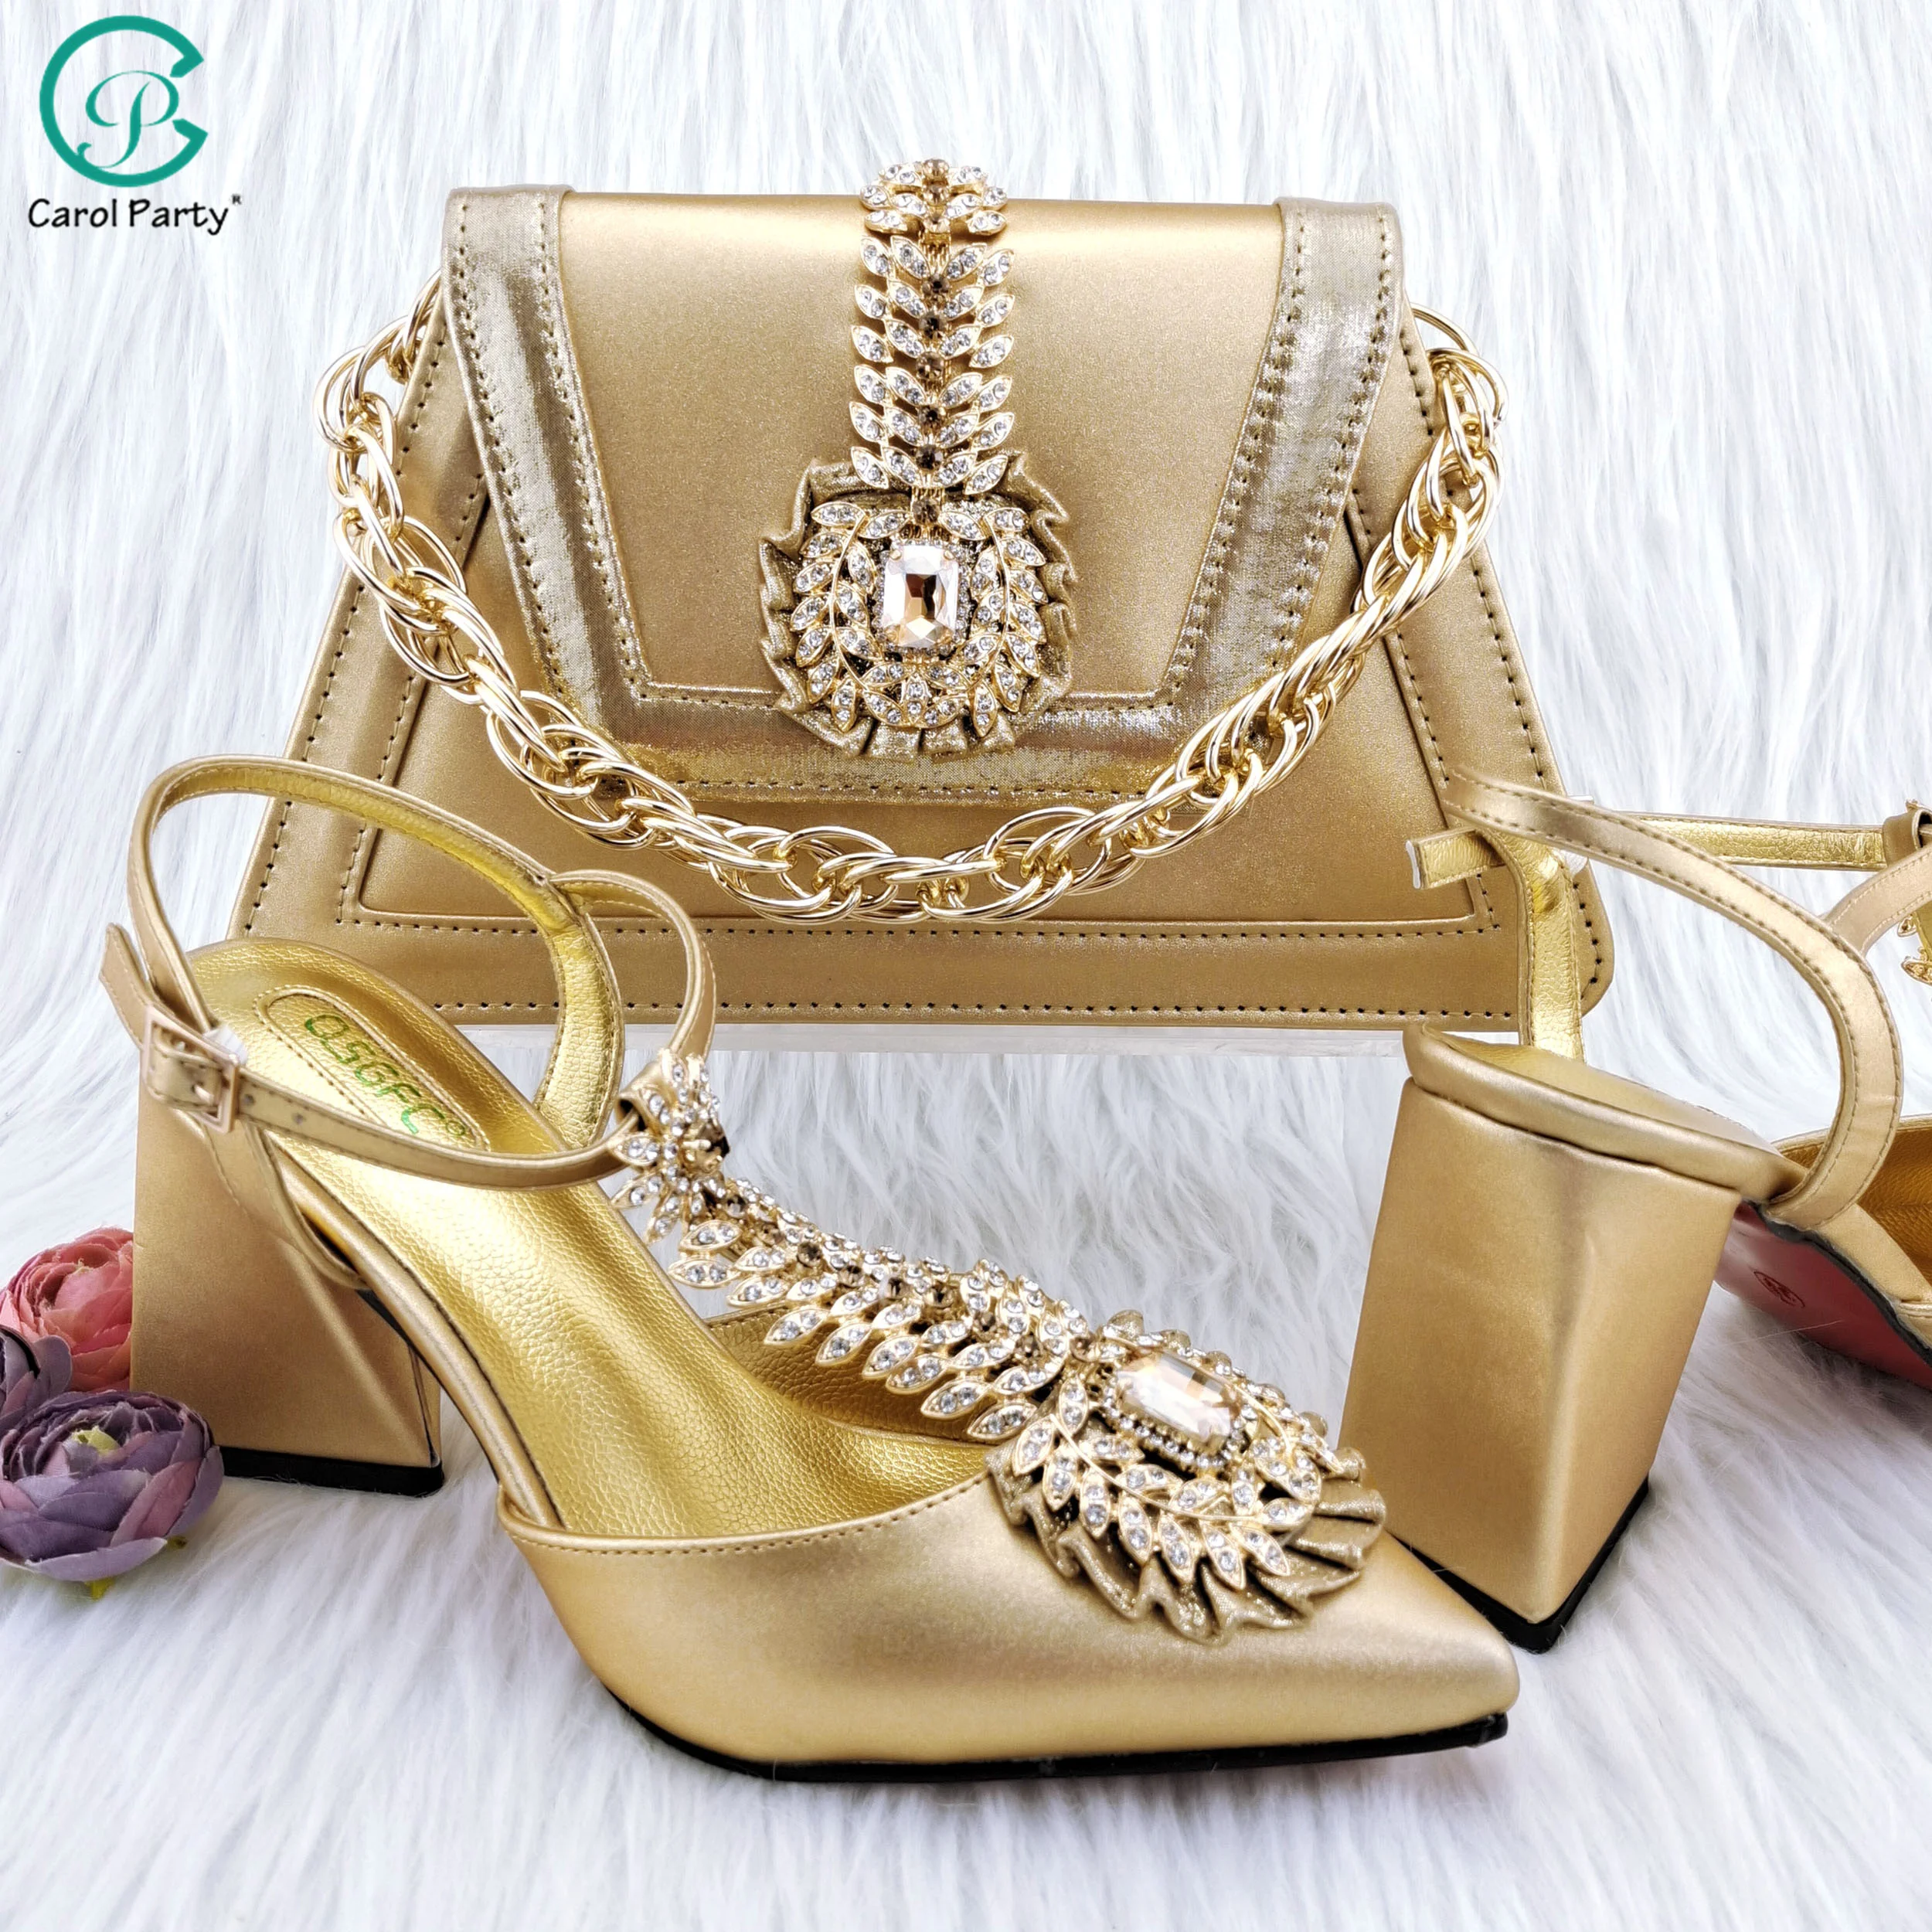 

QSGFC Shiny Diamond Three-Dimensional Women's Bag With High-Heeled Shoes Italian Popular Design African Ladies Shoes Bag set